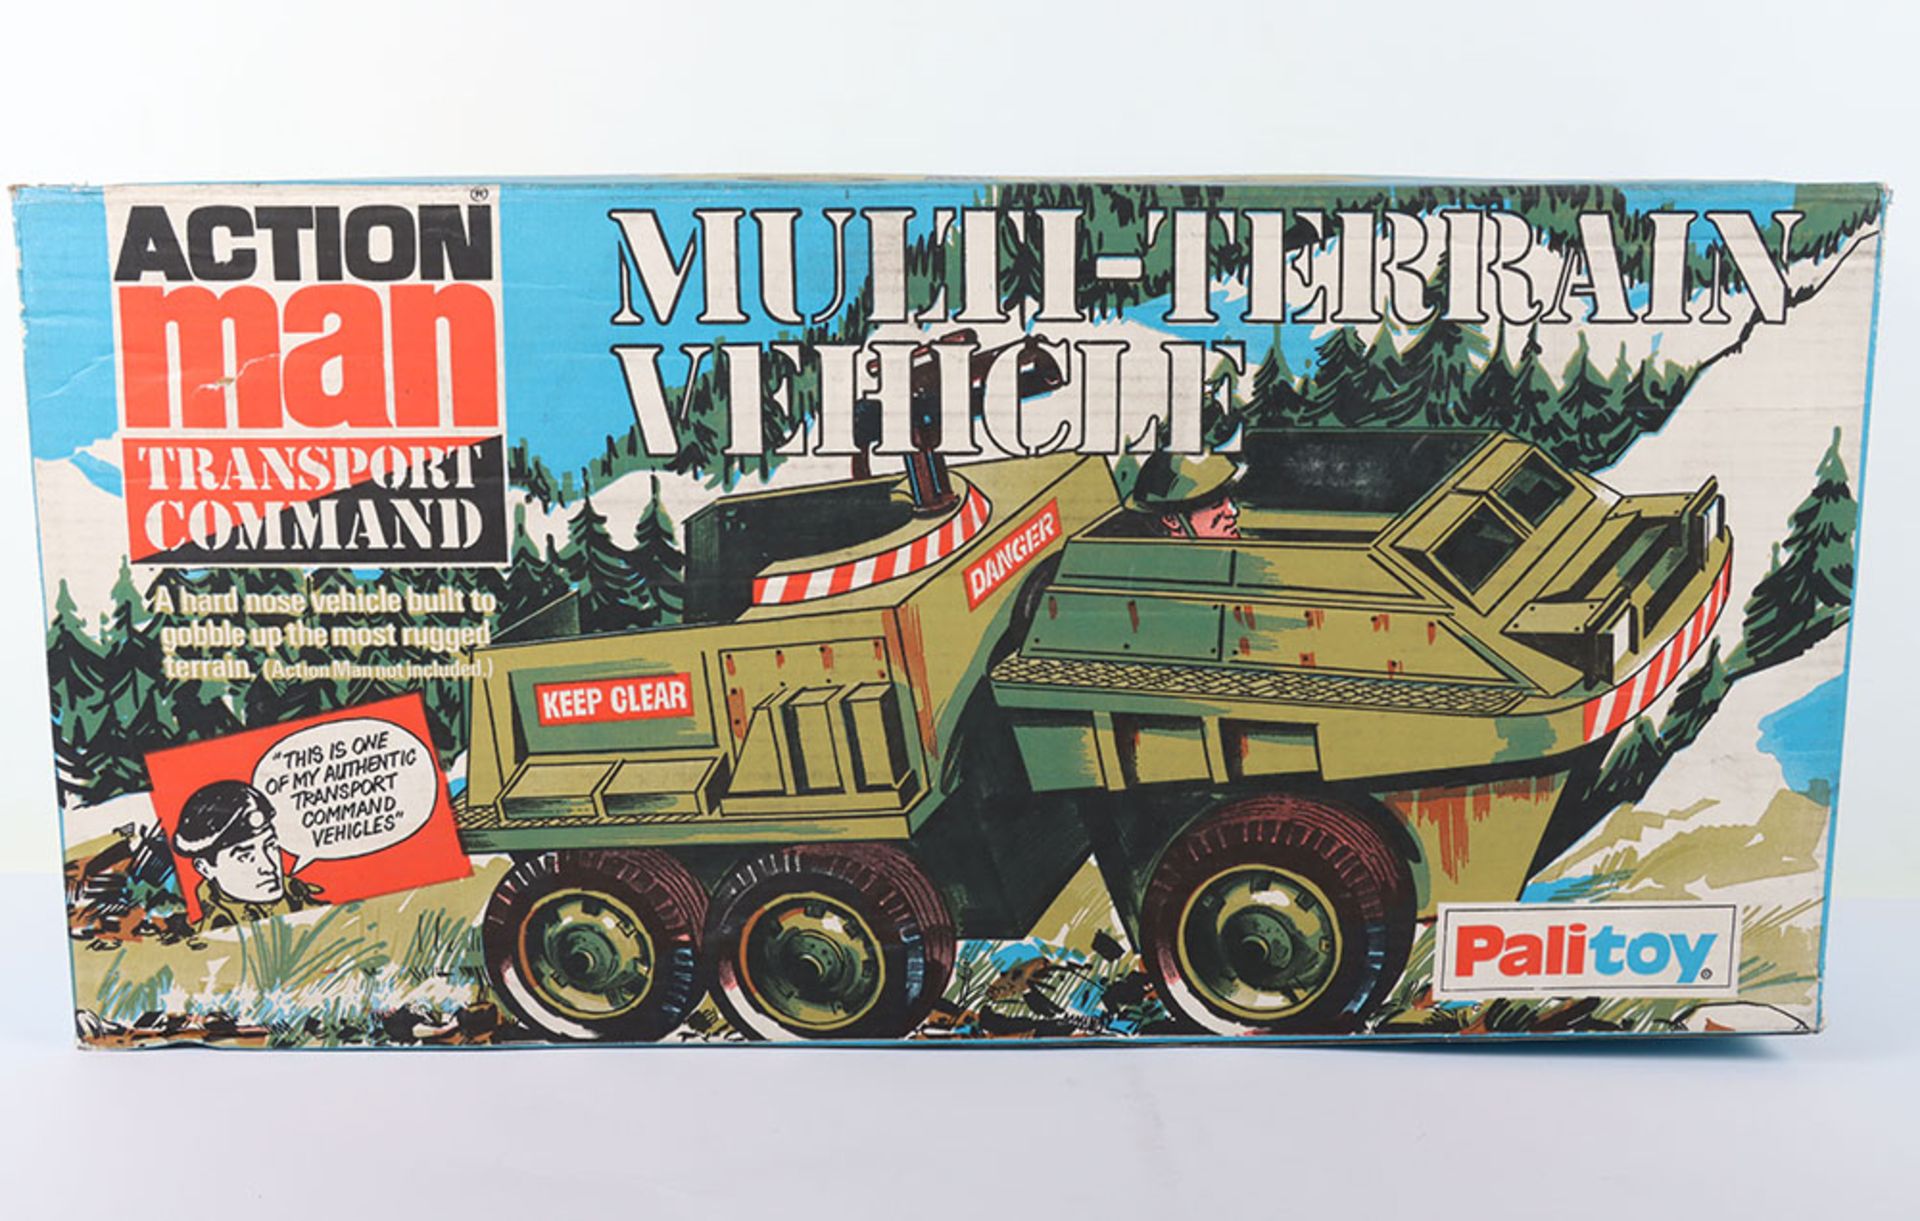 Palitoy Action Man Transport Command Multi-Terrain Vehicle - Image 6 of 8